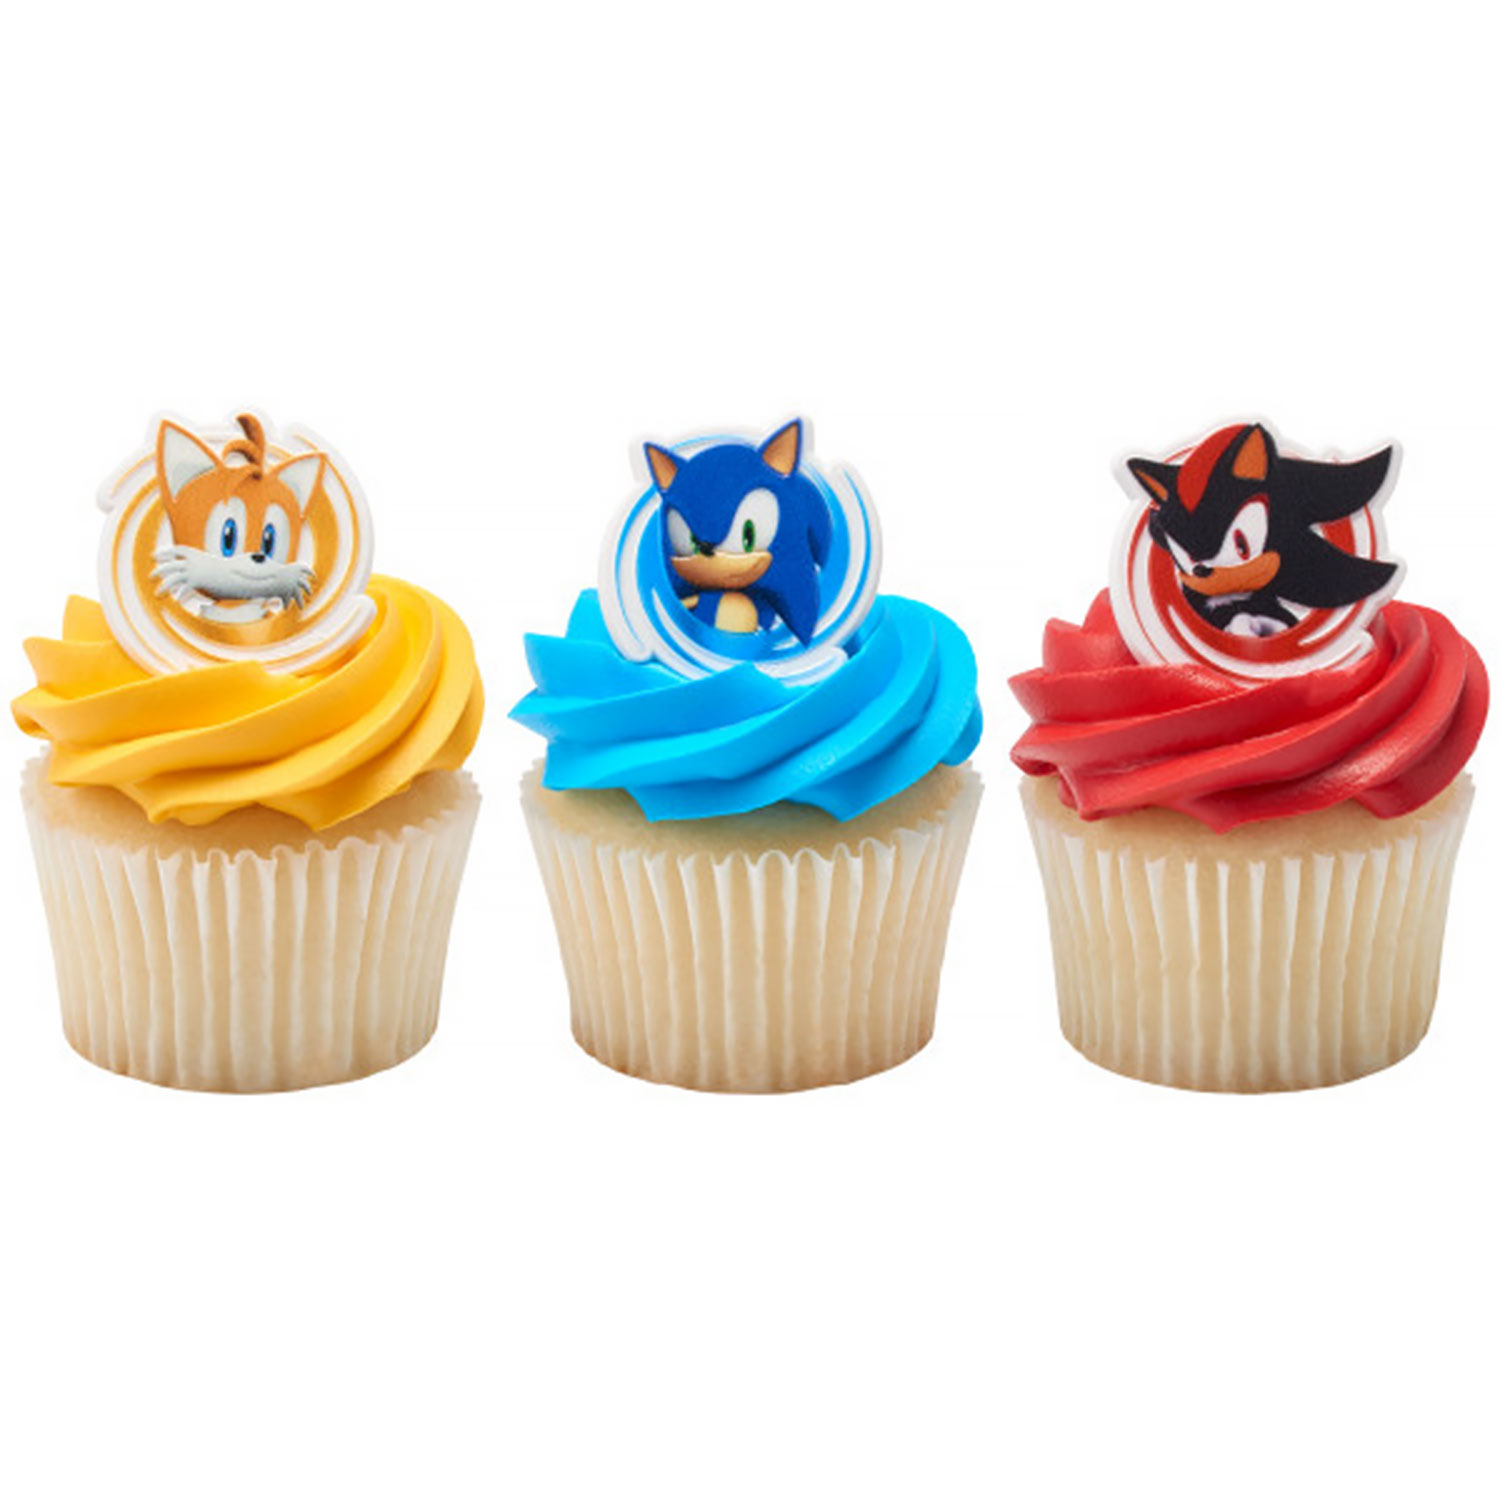 Sonic the Hedgehog Cupcake Toppers